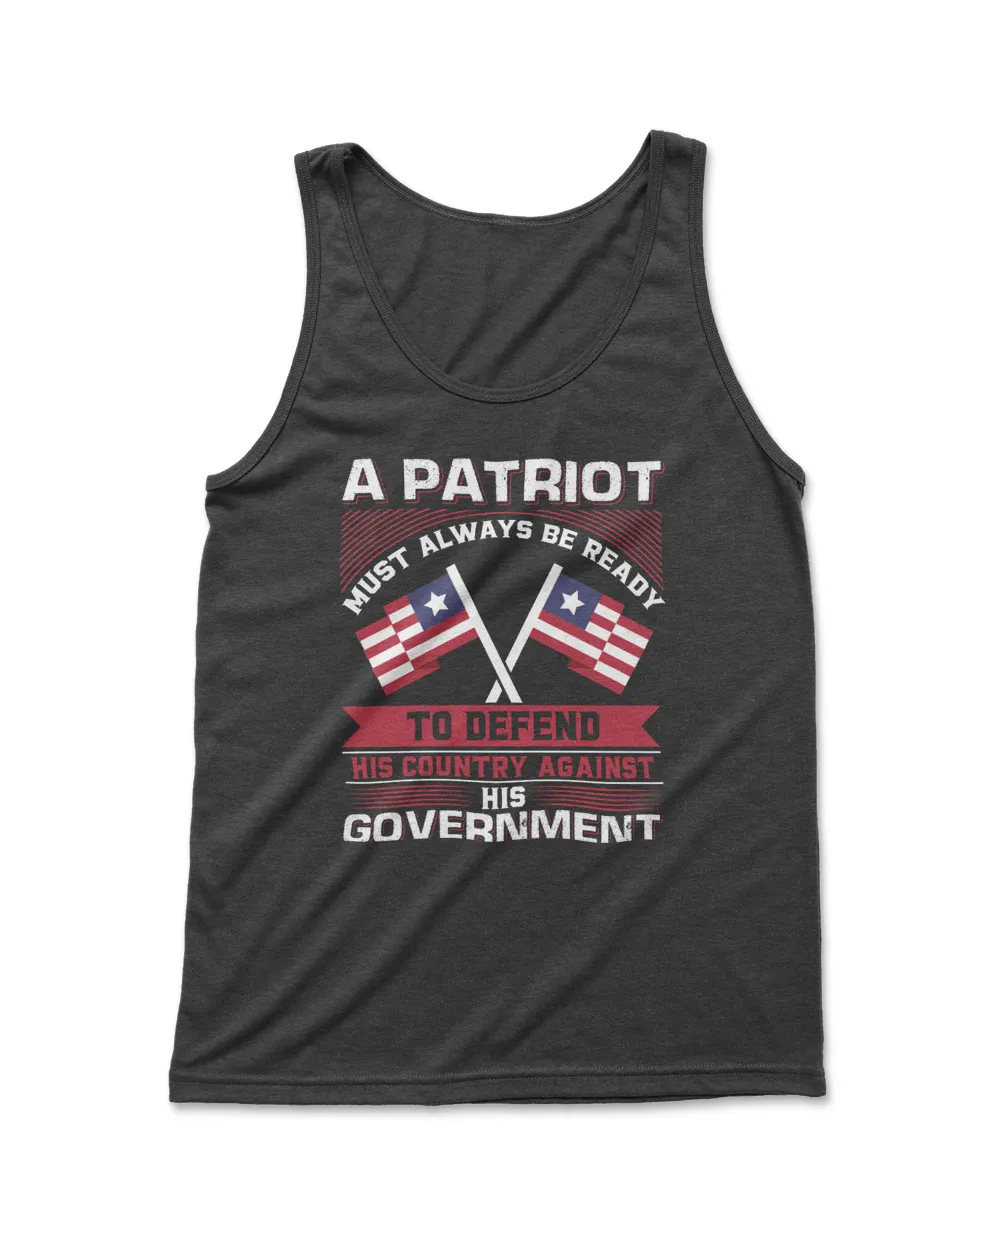 A Patriot Must Always Be Ready To Defend His Country Against His Government